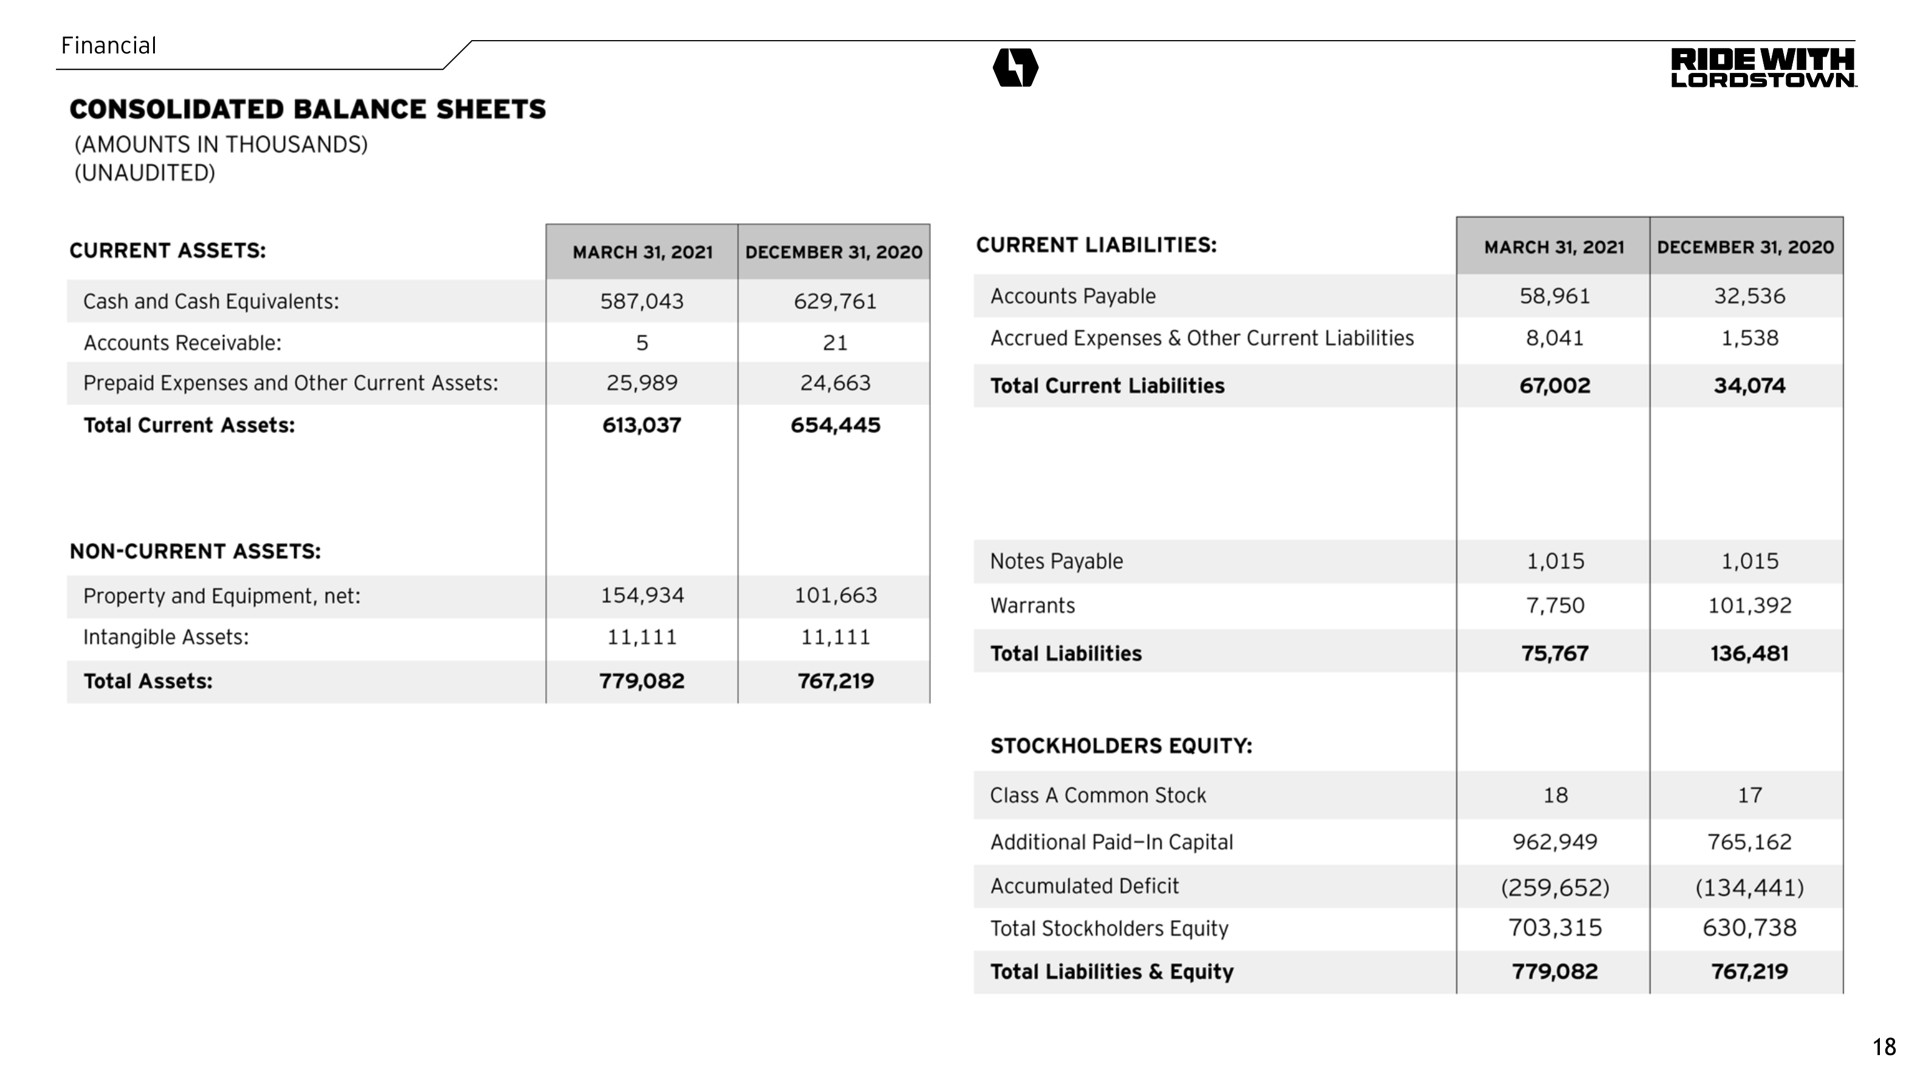 financial ride with consolidated balance sheets | Lordstown Motors